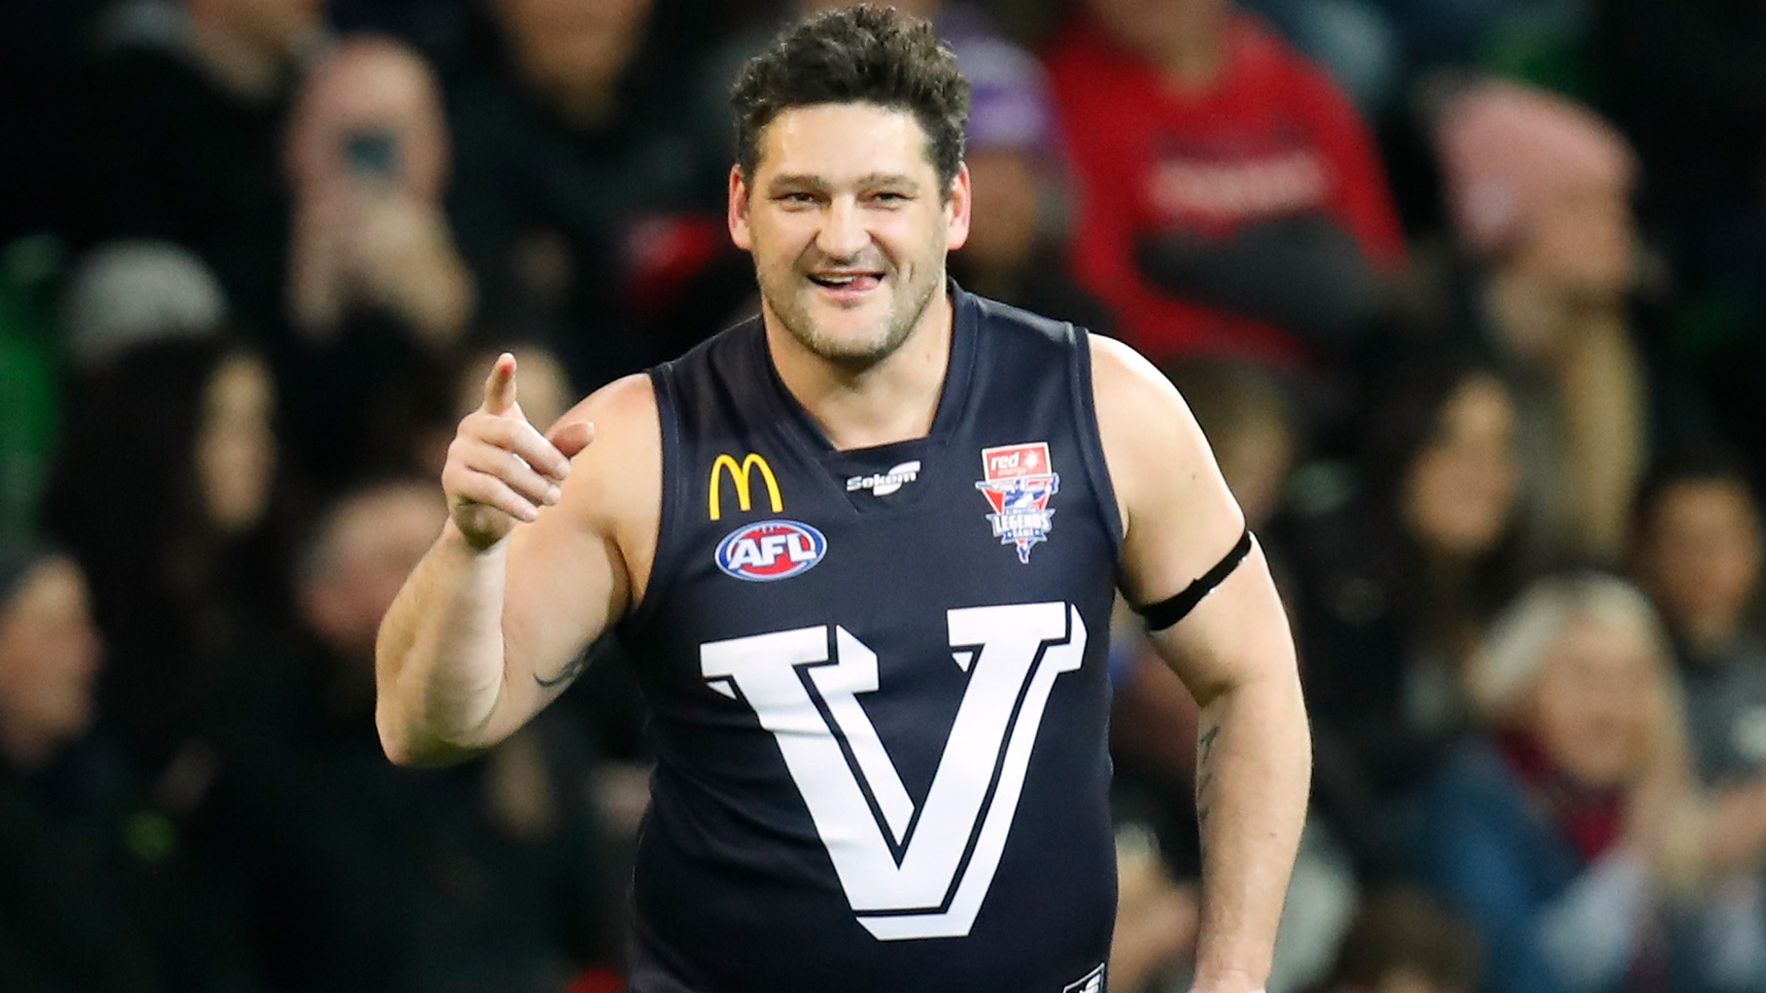 AFL great Brendan Fevola reveals stunning weight loss ahead of boxing bout with Cameron Mooney